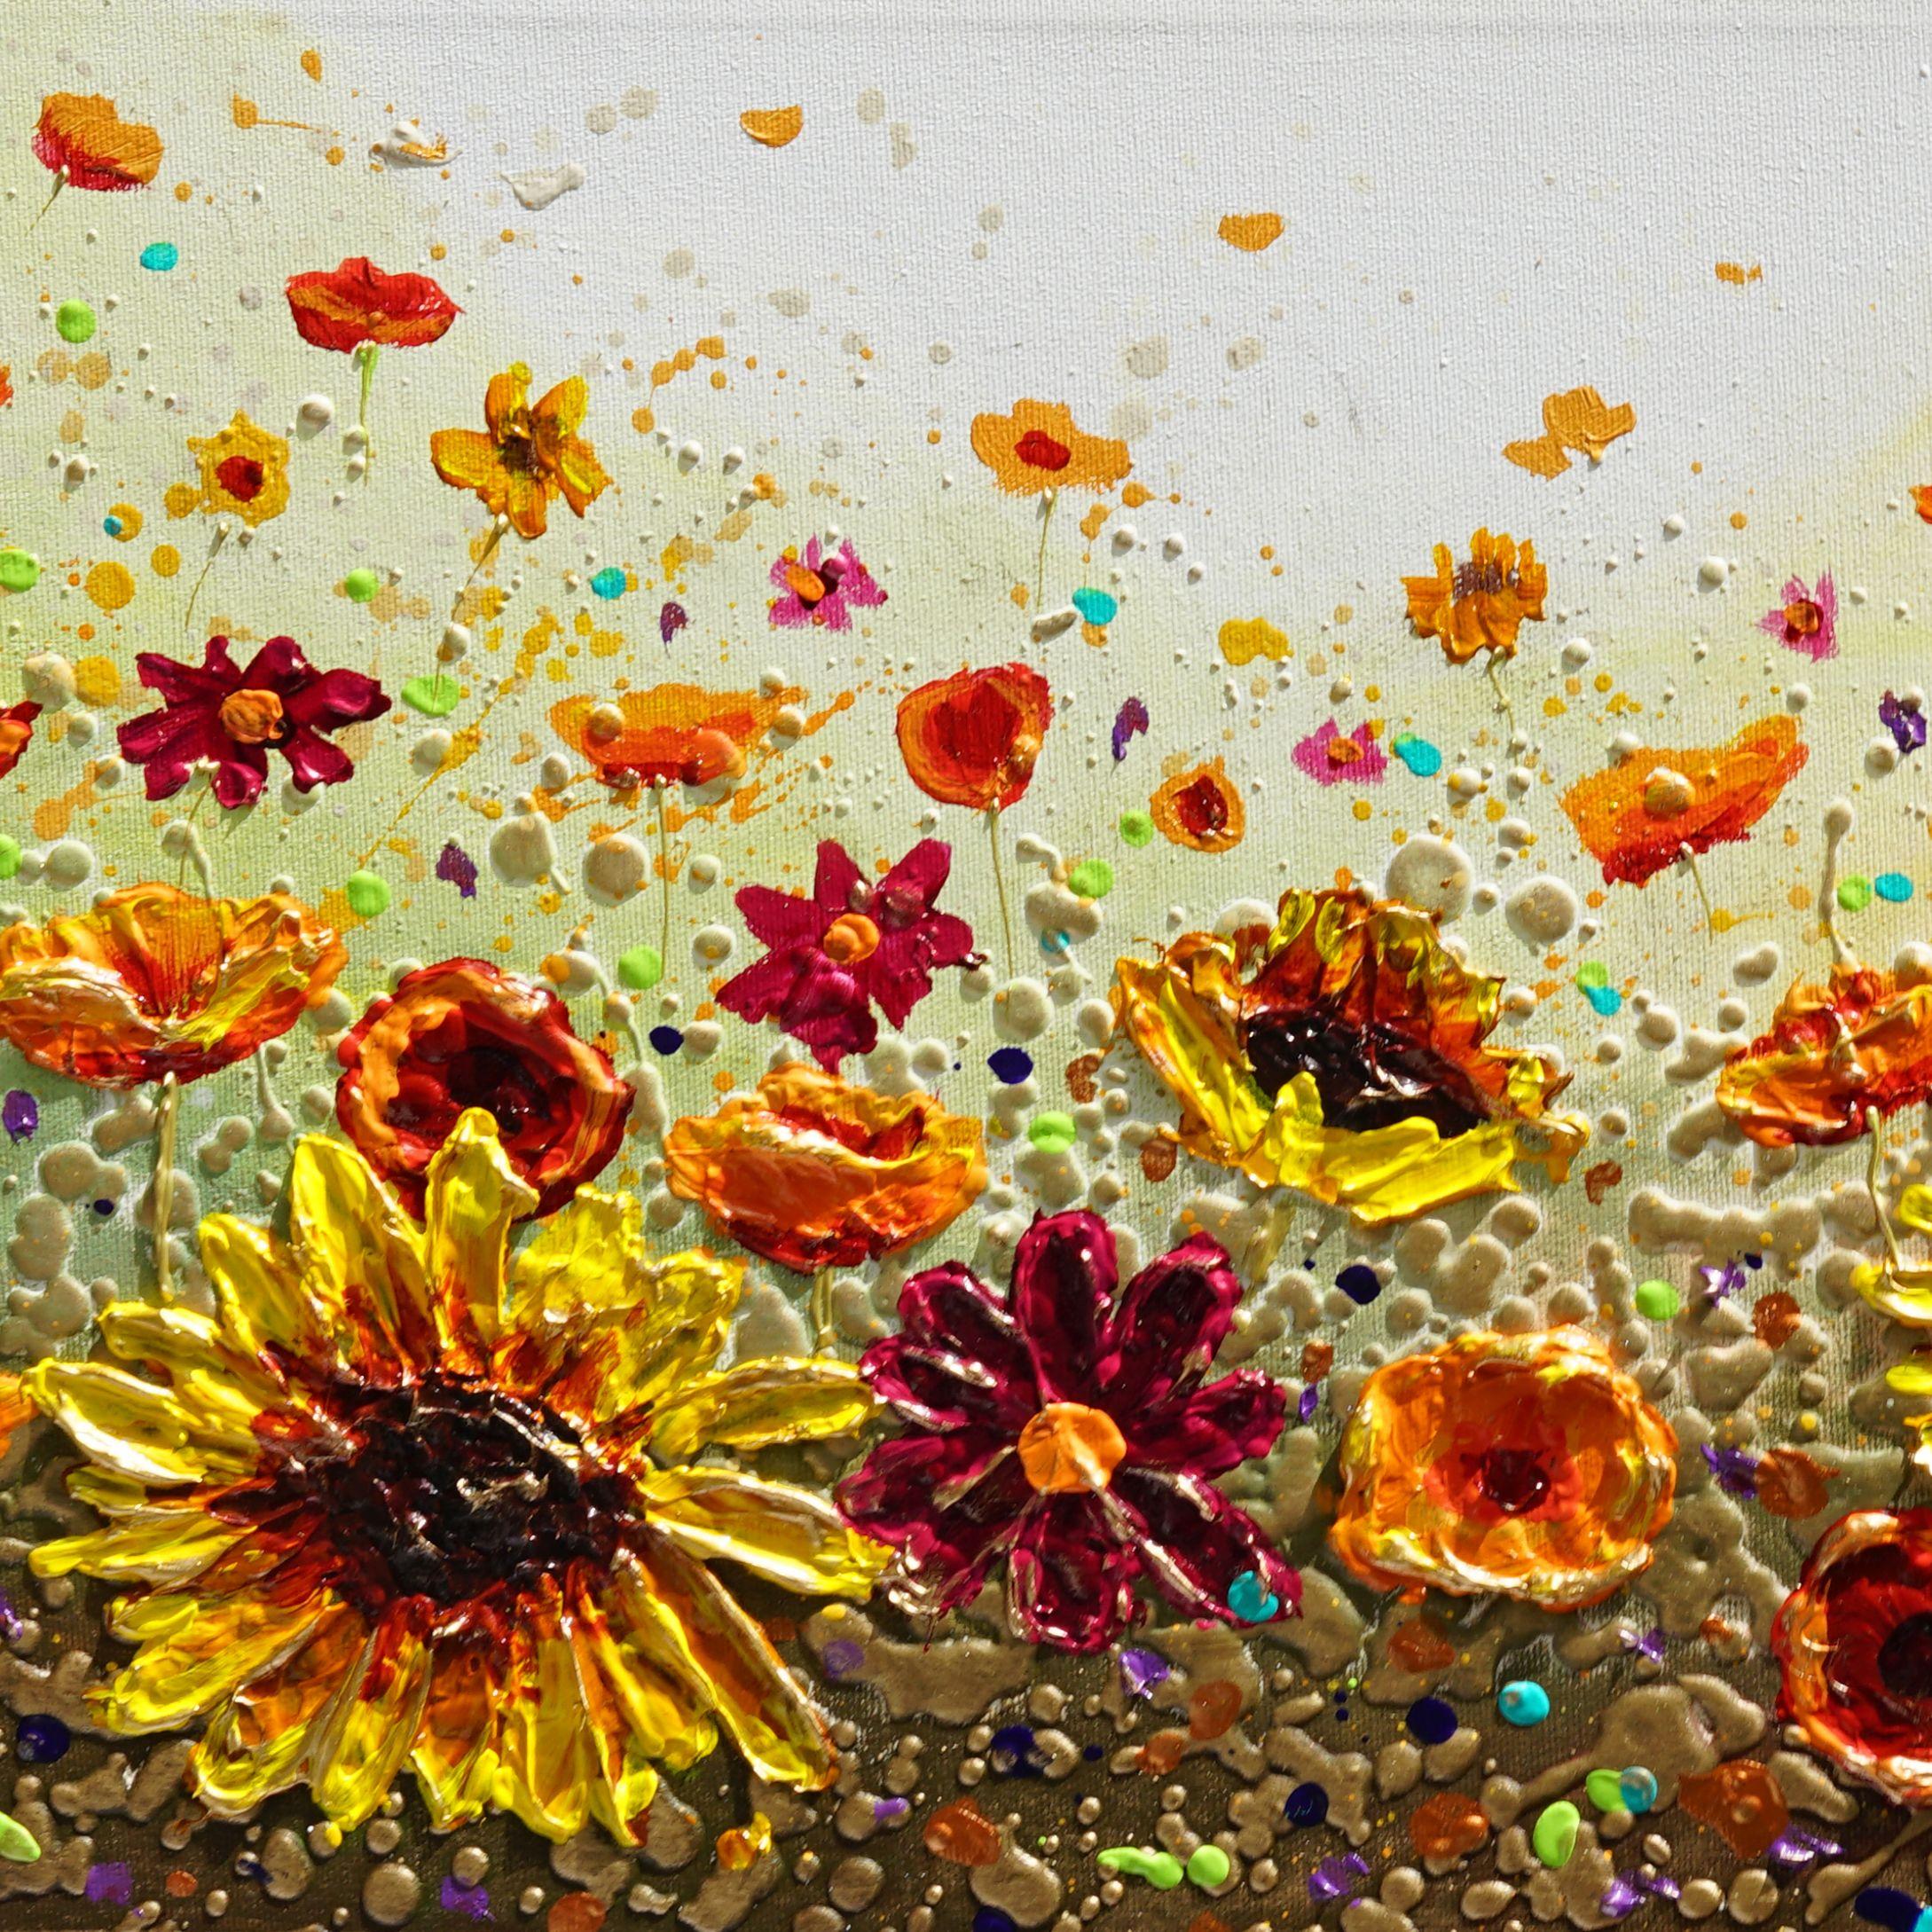 Sunlit Floral, Painting, Acrylic on Canvas 1